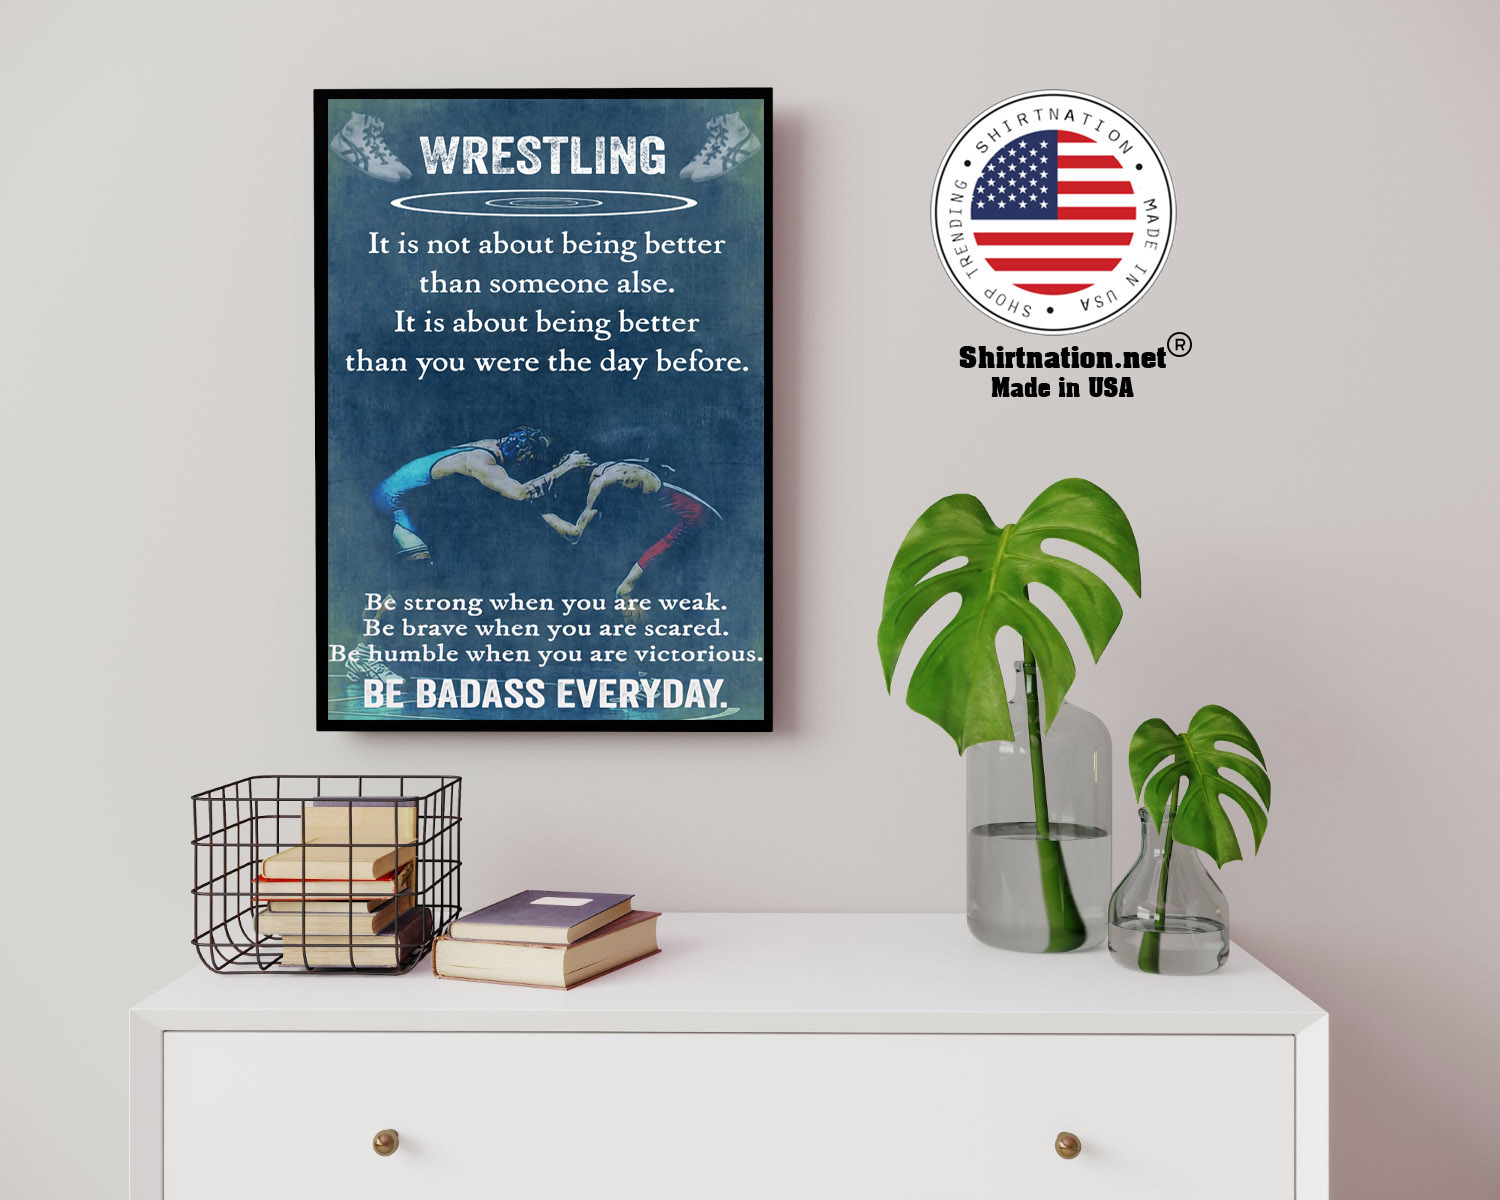 Wrestling it is not about being better than someine else poster 14